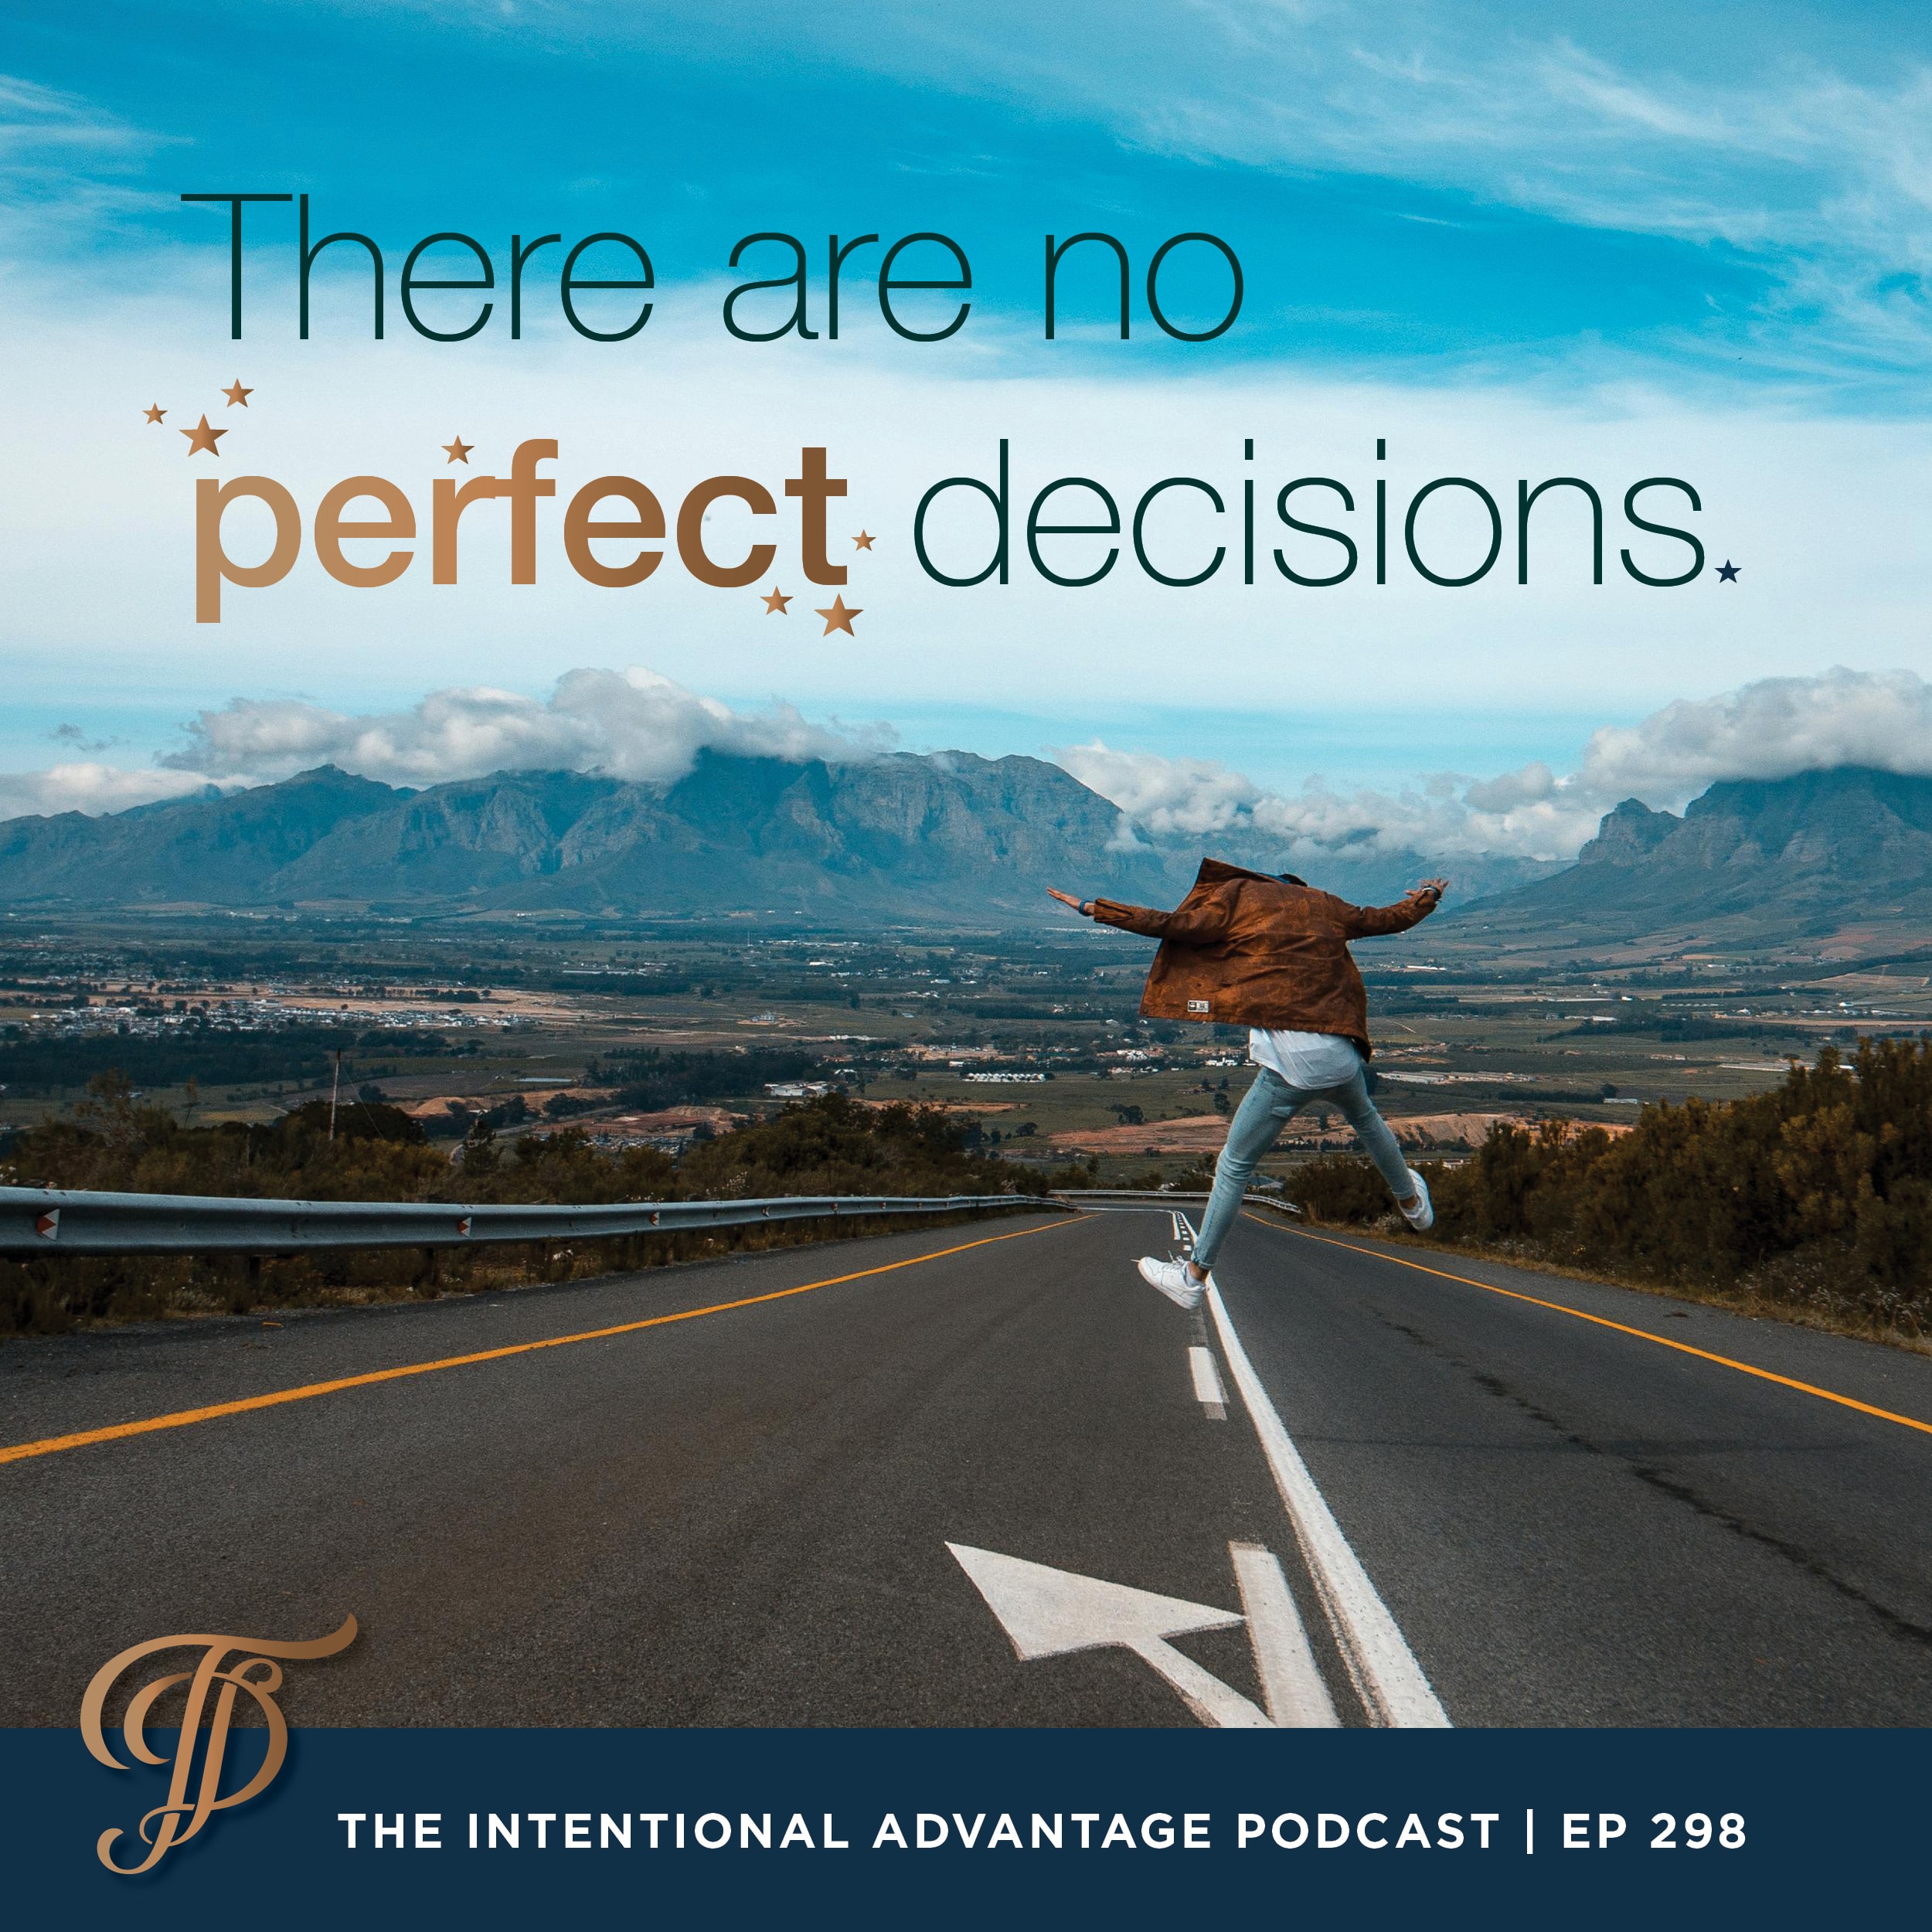 Intentional Advantage Podcast with Tanya Dalton and John Dalton The power of imperfect decisions